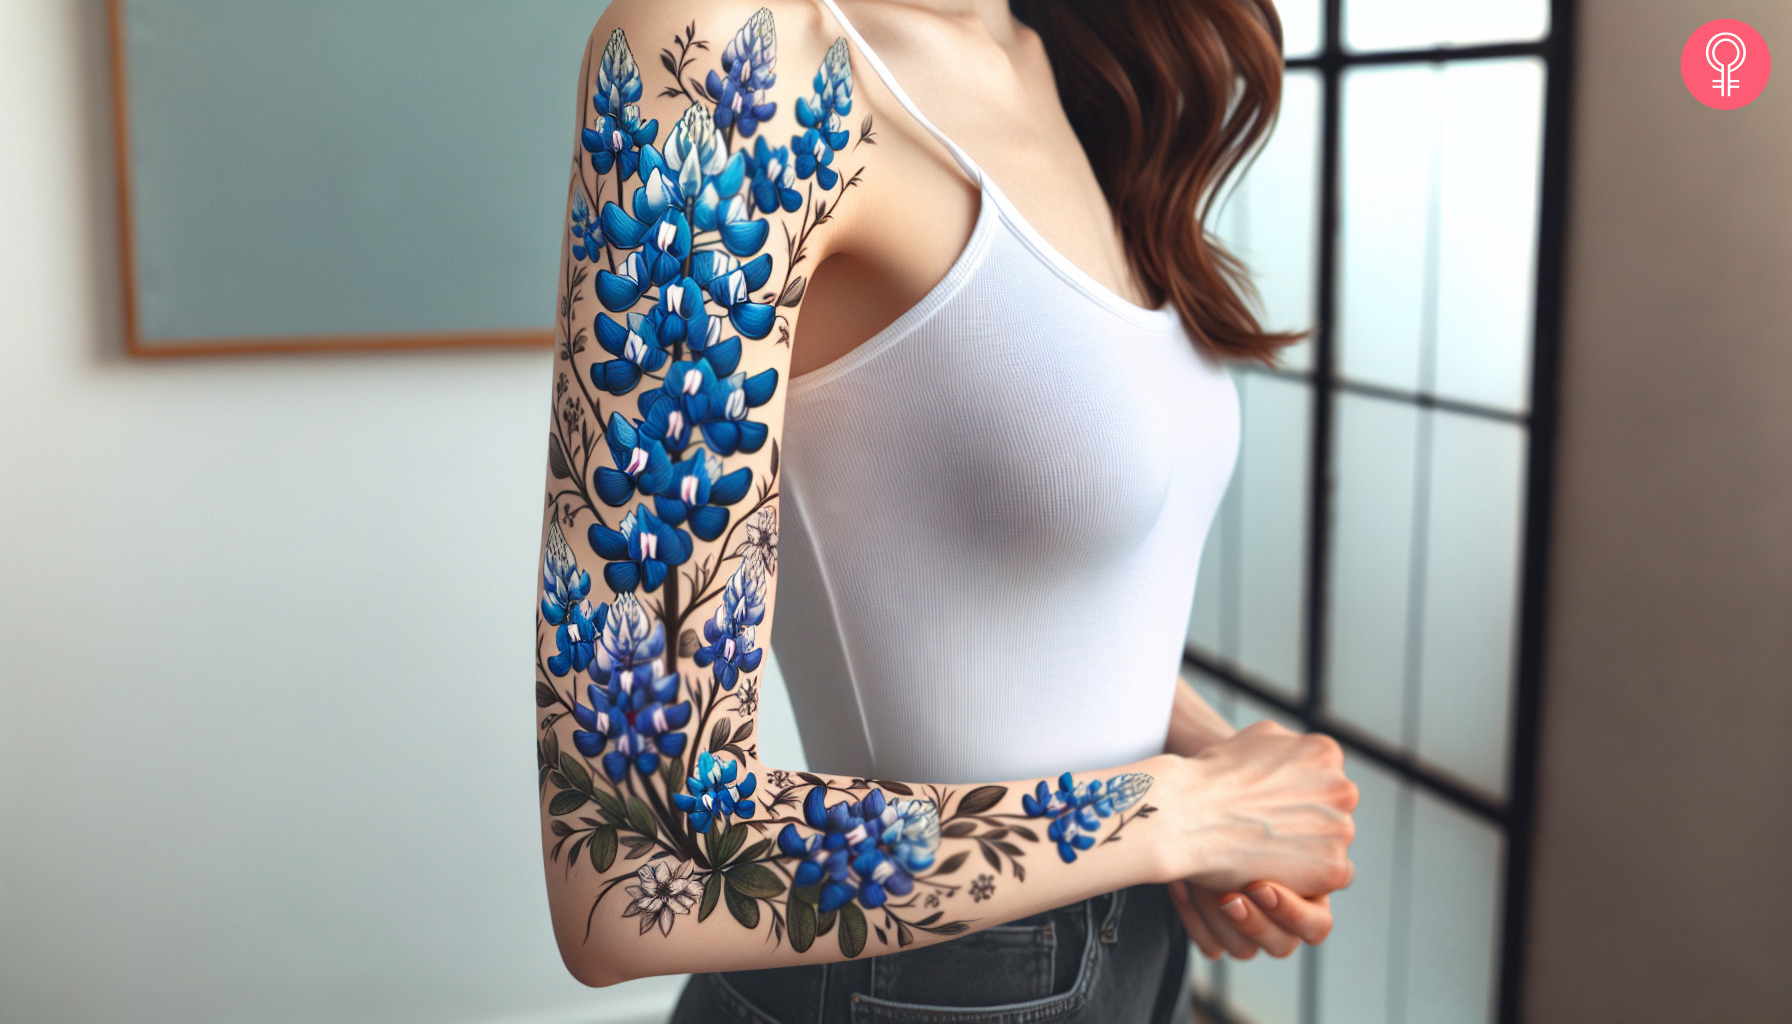 Bluebonnet tattoo on the arm sleeve of a woman